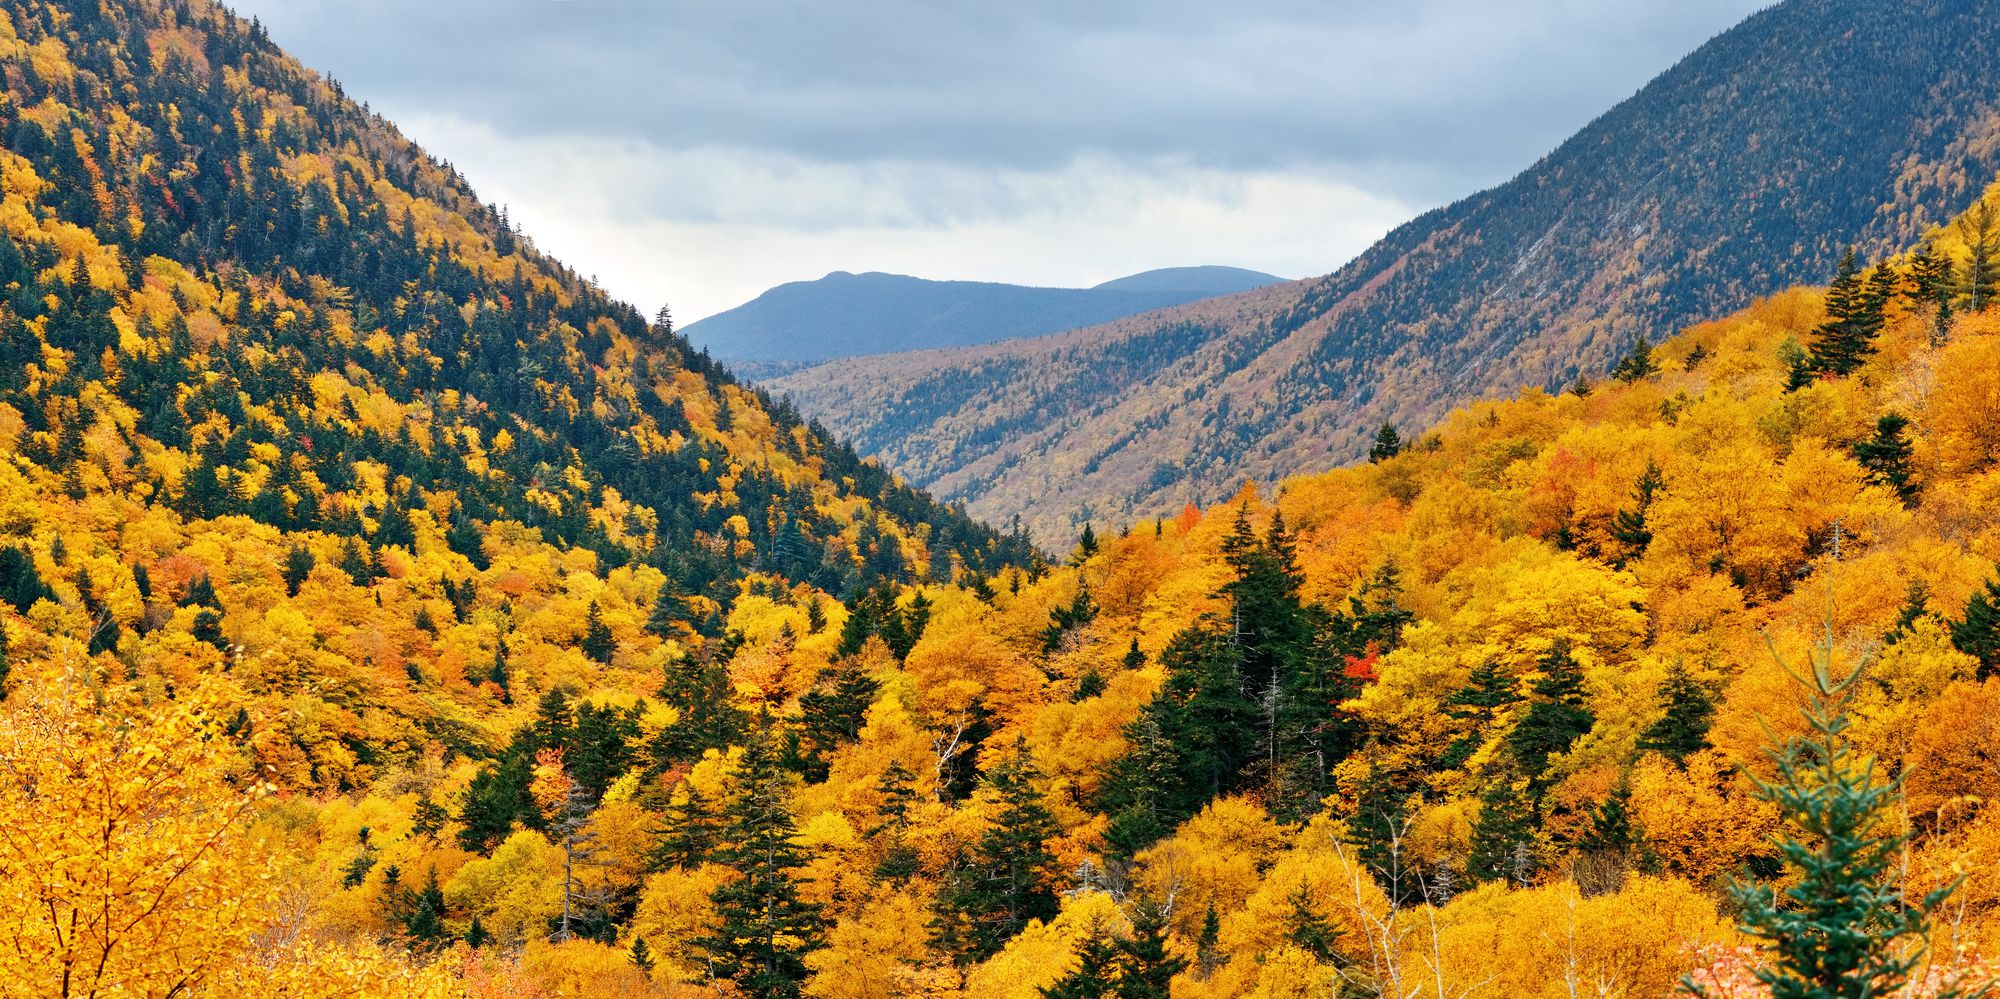 <p><strong>Average Summer Temperature</strong>: 55-75°F (13–24°C)</p><p>New Hampshire's <a href="https://www.visitwhitemountains.com/">White Mountains</a> offer a cool and refreshing escape from the summer heat. While lower elevations can still experience temperatures rising to 75 degrees, the higher you go, the chillier it will be. The highest points of the mountains stay covered in snow even until the peak of the summer.</p><p>Nature lovers can enjoy the mountains' great beauty on one of the many extensive hiking trails, including parts of the Appalachian Trail, Mount Washington, Franconia Ridge, and the Flume Gorge.</p><p>Adventure seekers can enjoy activities like zip-lining, rock climbing, and mountain biking.</p><p>You can also cool off with water activities like kayaking, canoeing, or swimming in the many lakes and rivers. Echo Lake, in Franconia Notch State Park, is a great spot for a refreshing swim or a paddle.</p>